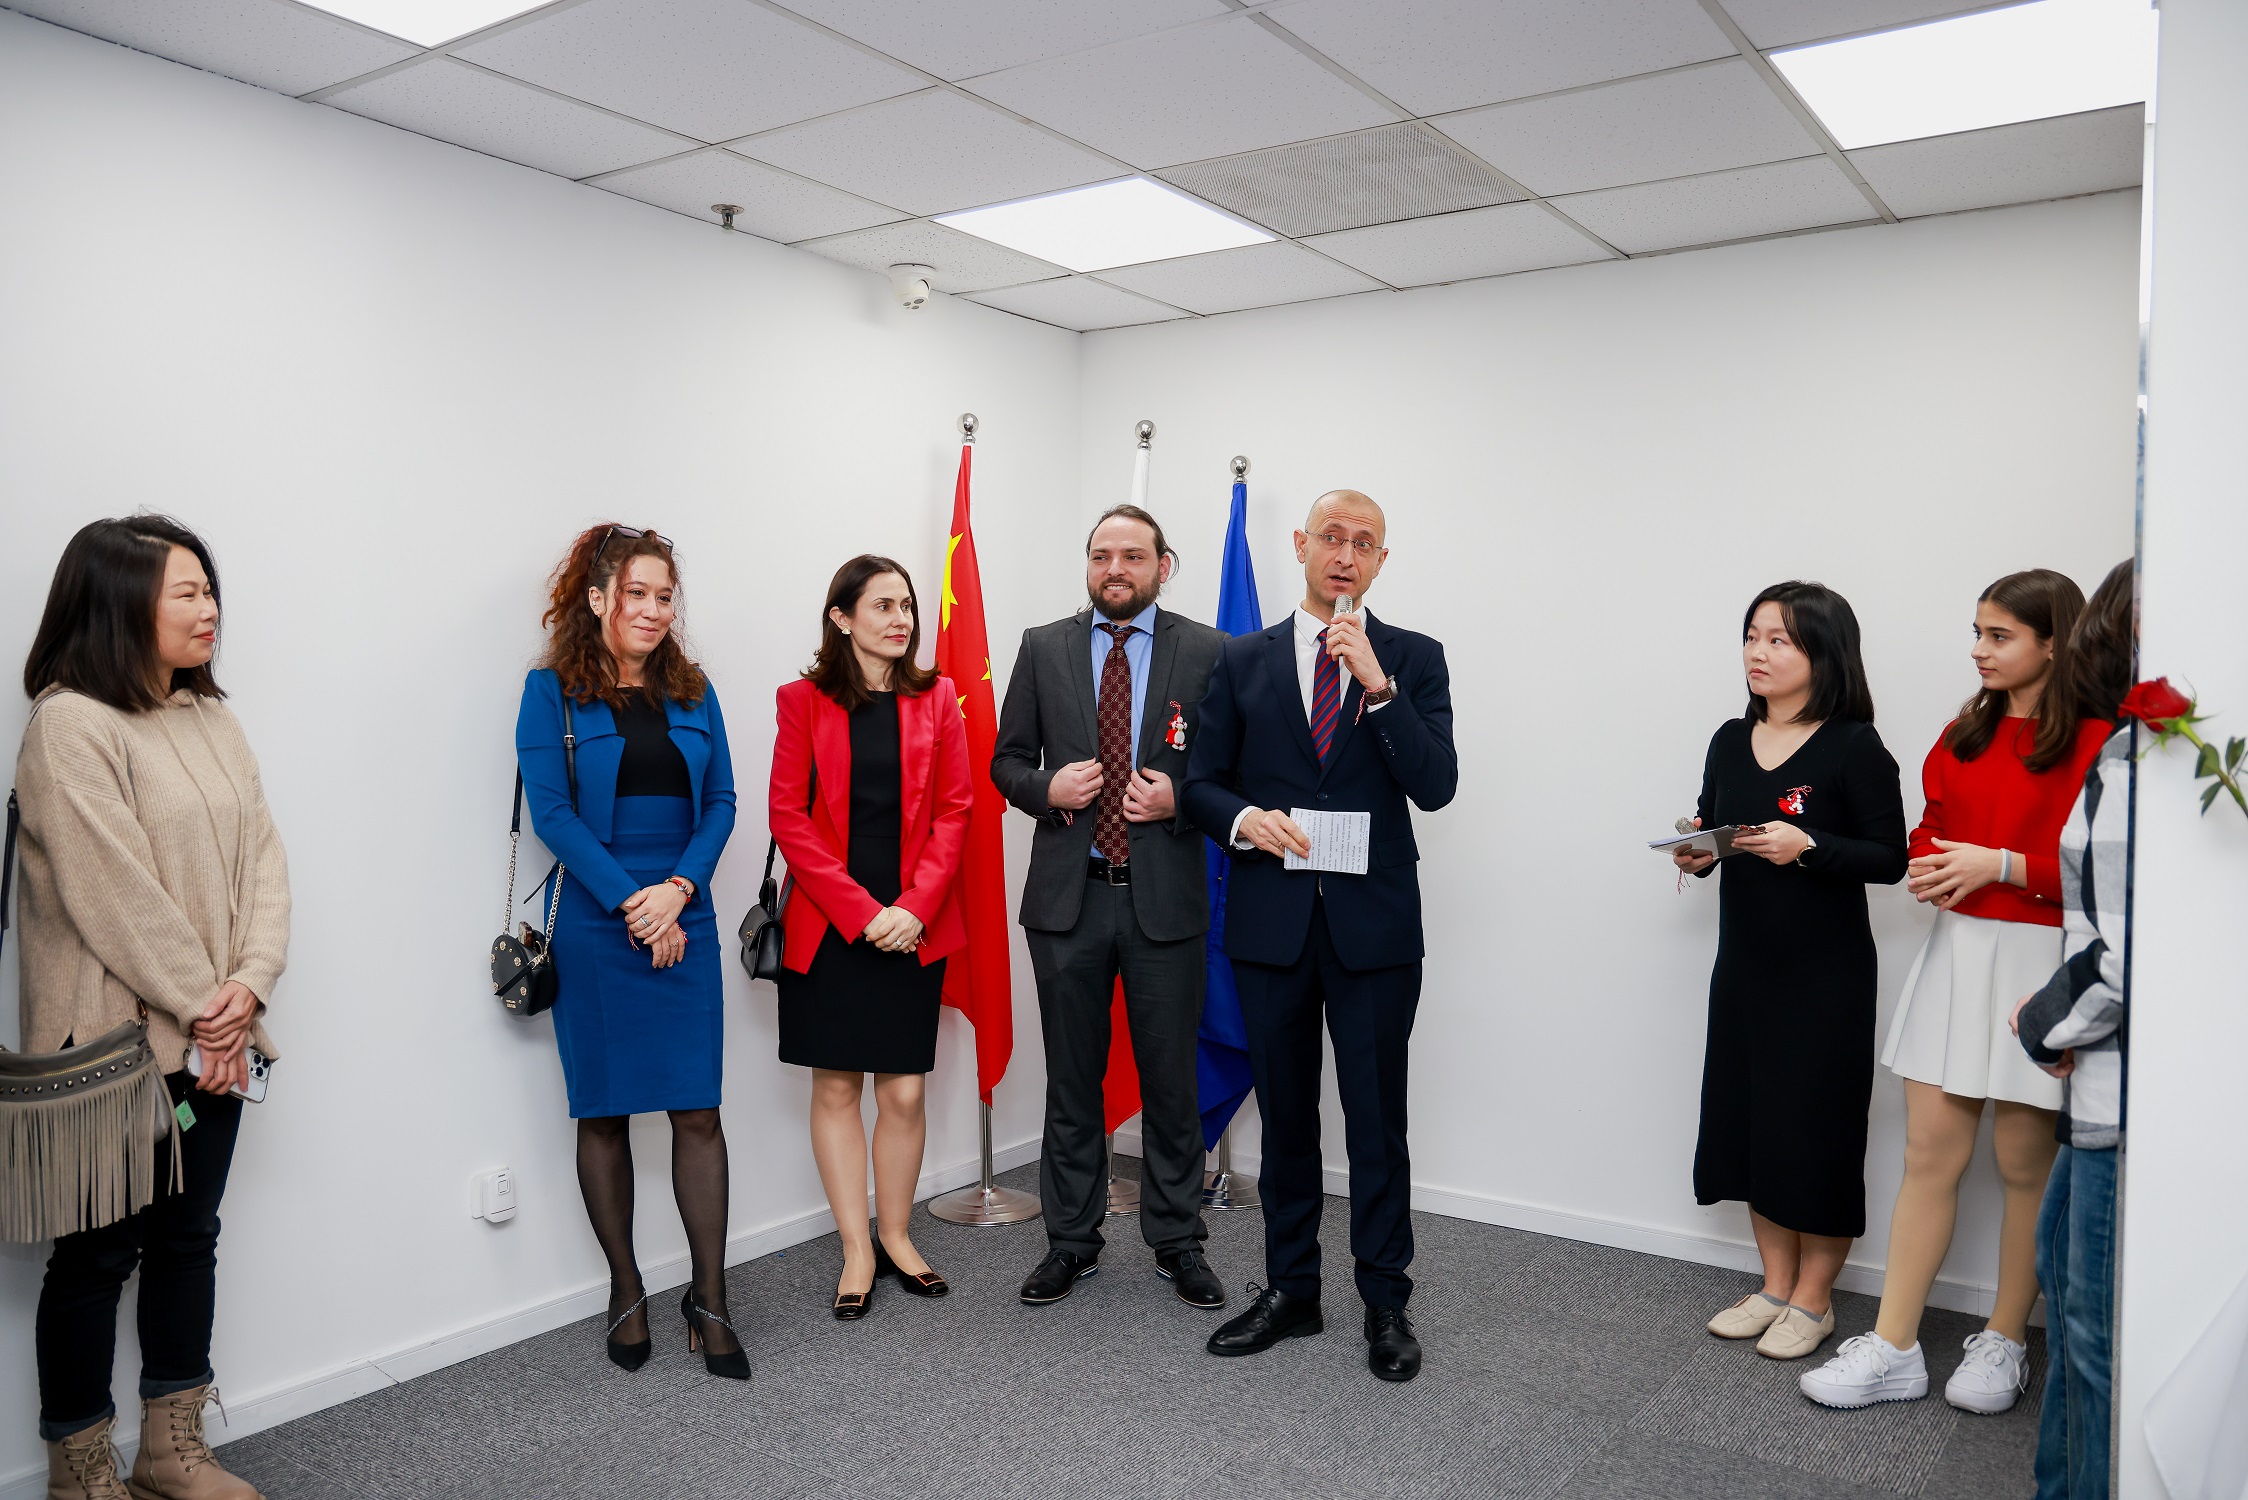 The Bulgarian community in the consular region of the Consulate General in Shanghai celebrated the National Day of Bulgaria